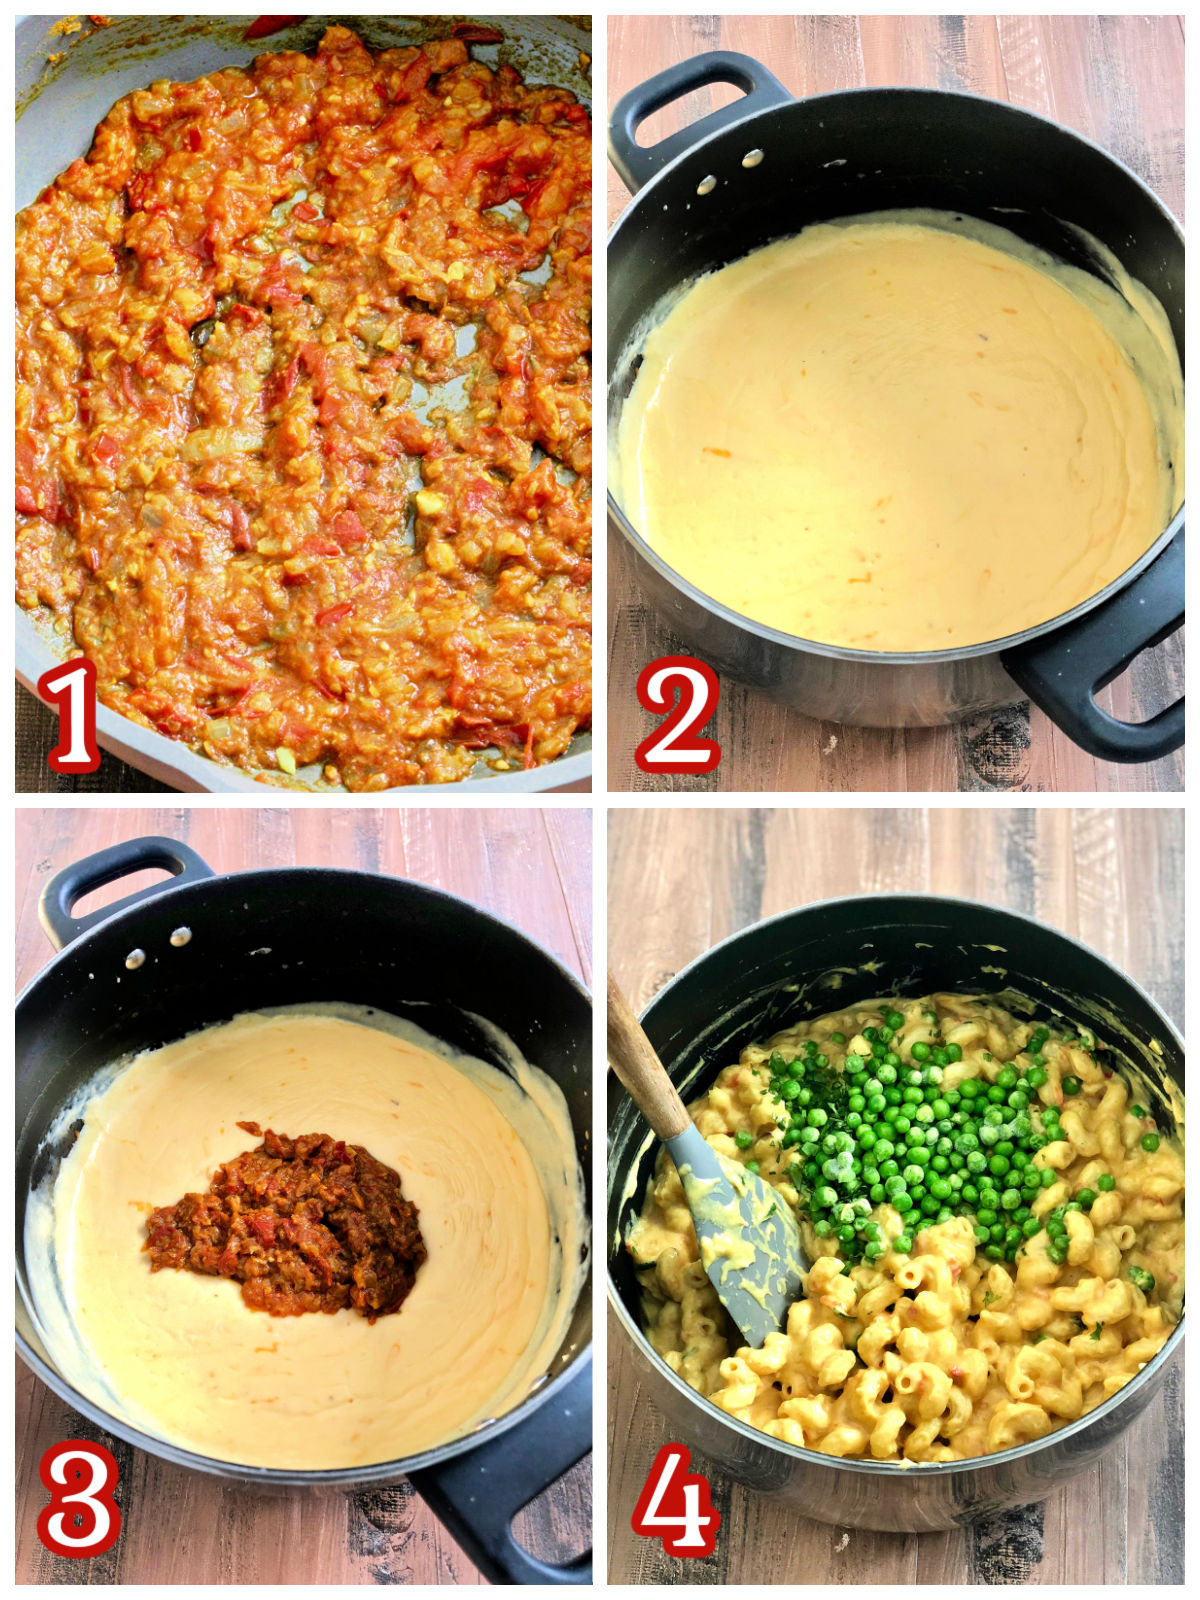 Steps 1-4 for making masala mac and cheese.